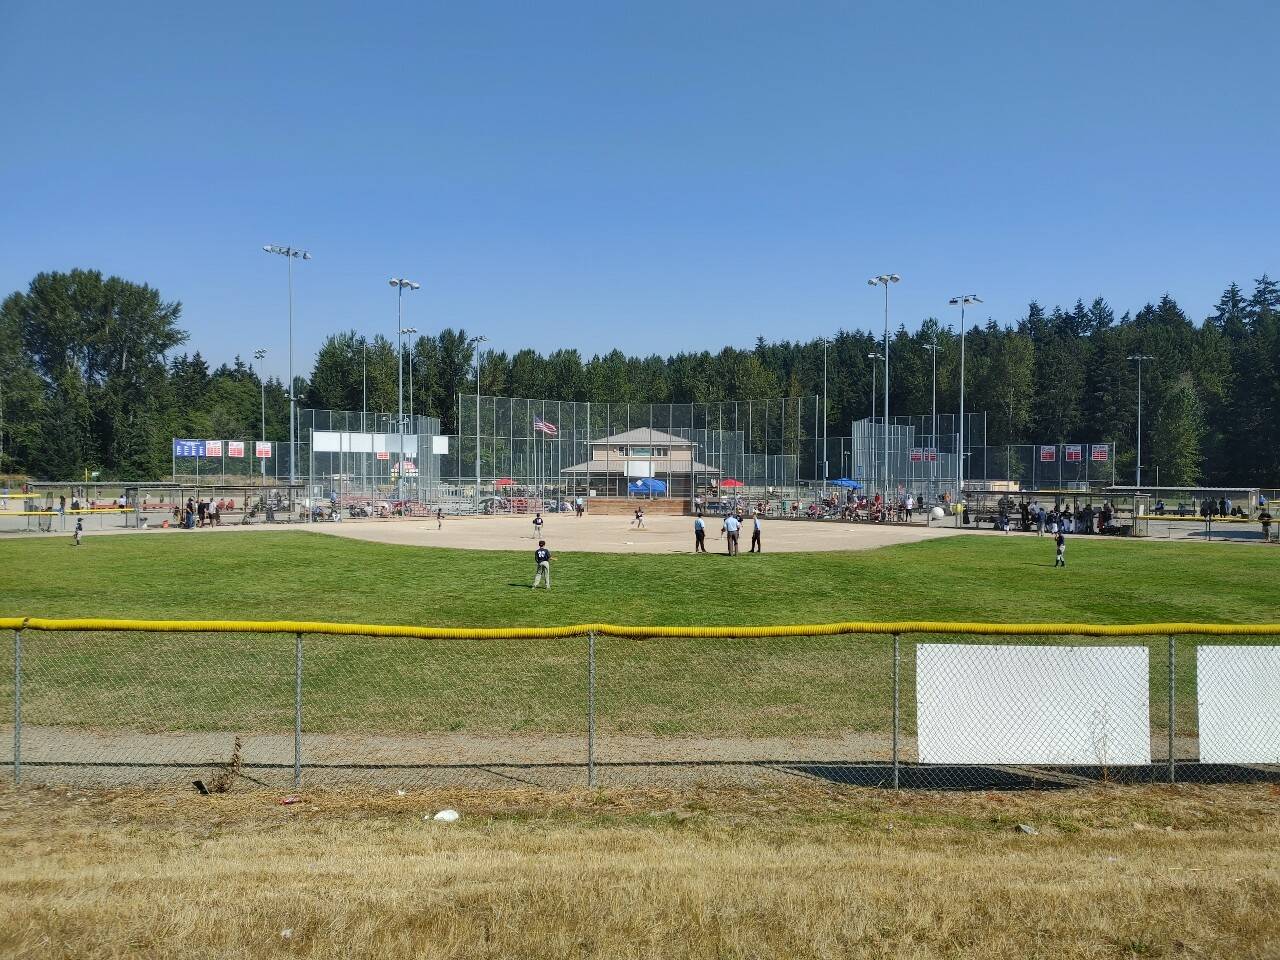 Federal Way National Little League hosted their fourth annual Hit-A-Thon fundraiser Sept. 10 to kick-start the fall ball season. Photo by Ben Ray/For the Mirror